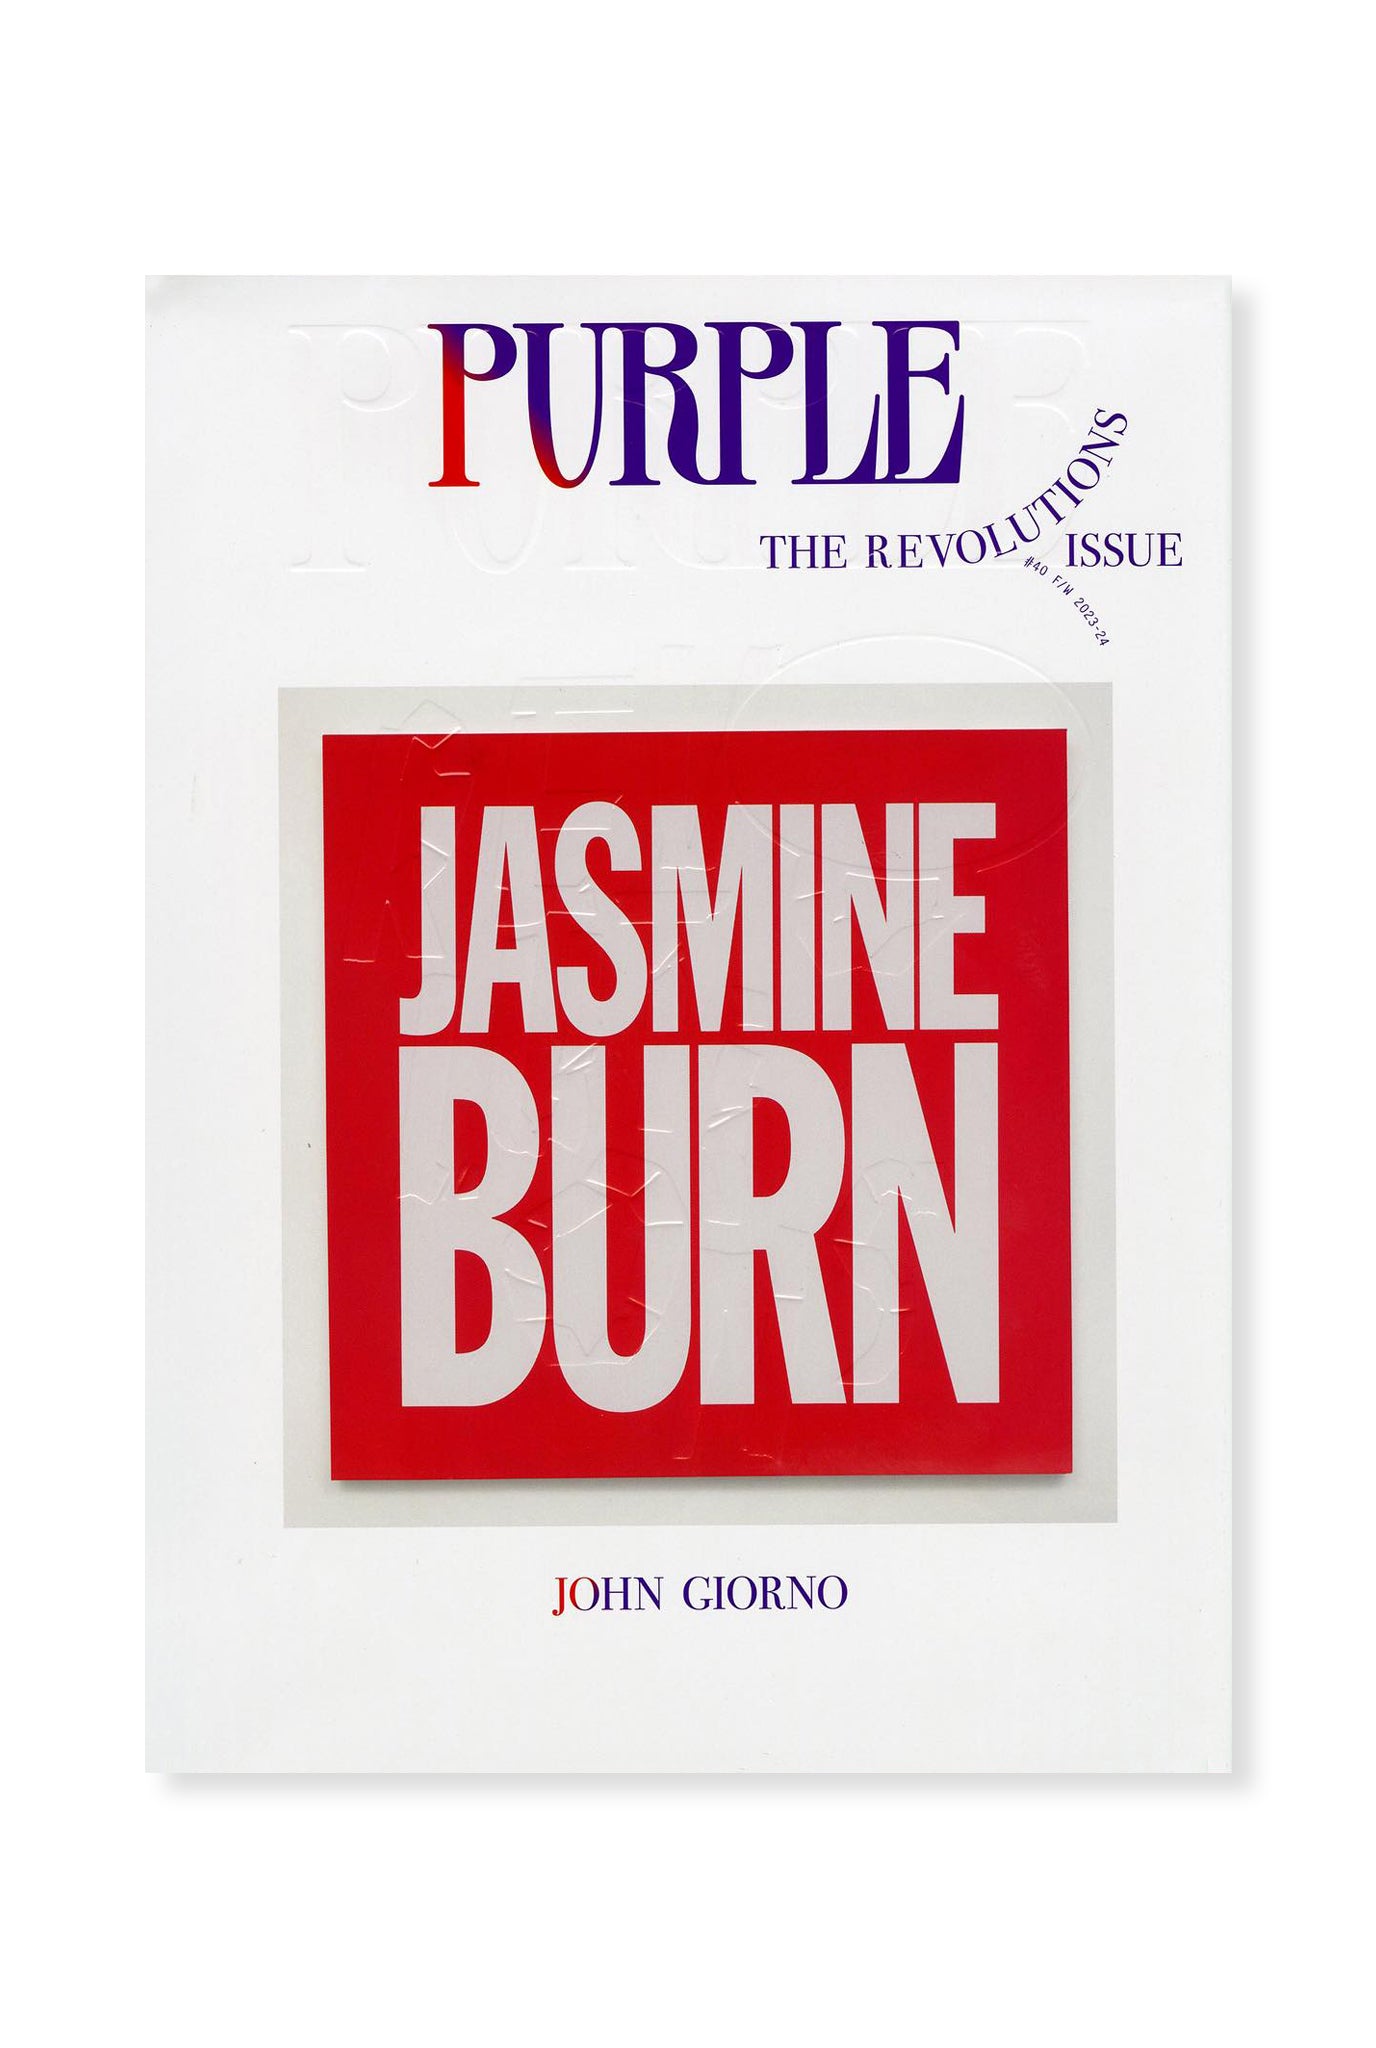 Purple, Issue 40 - The Revolutions Issue